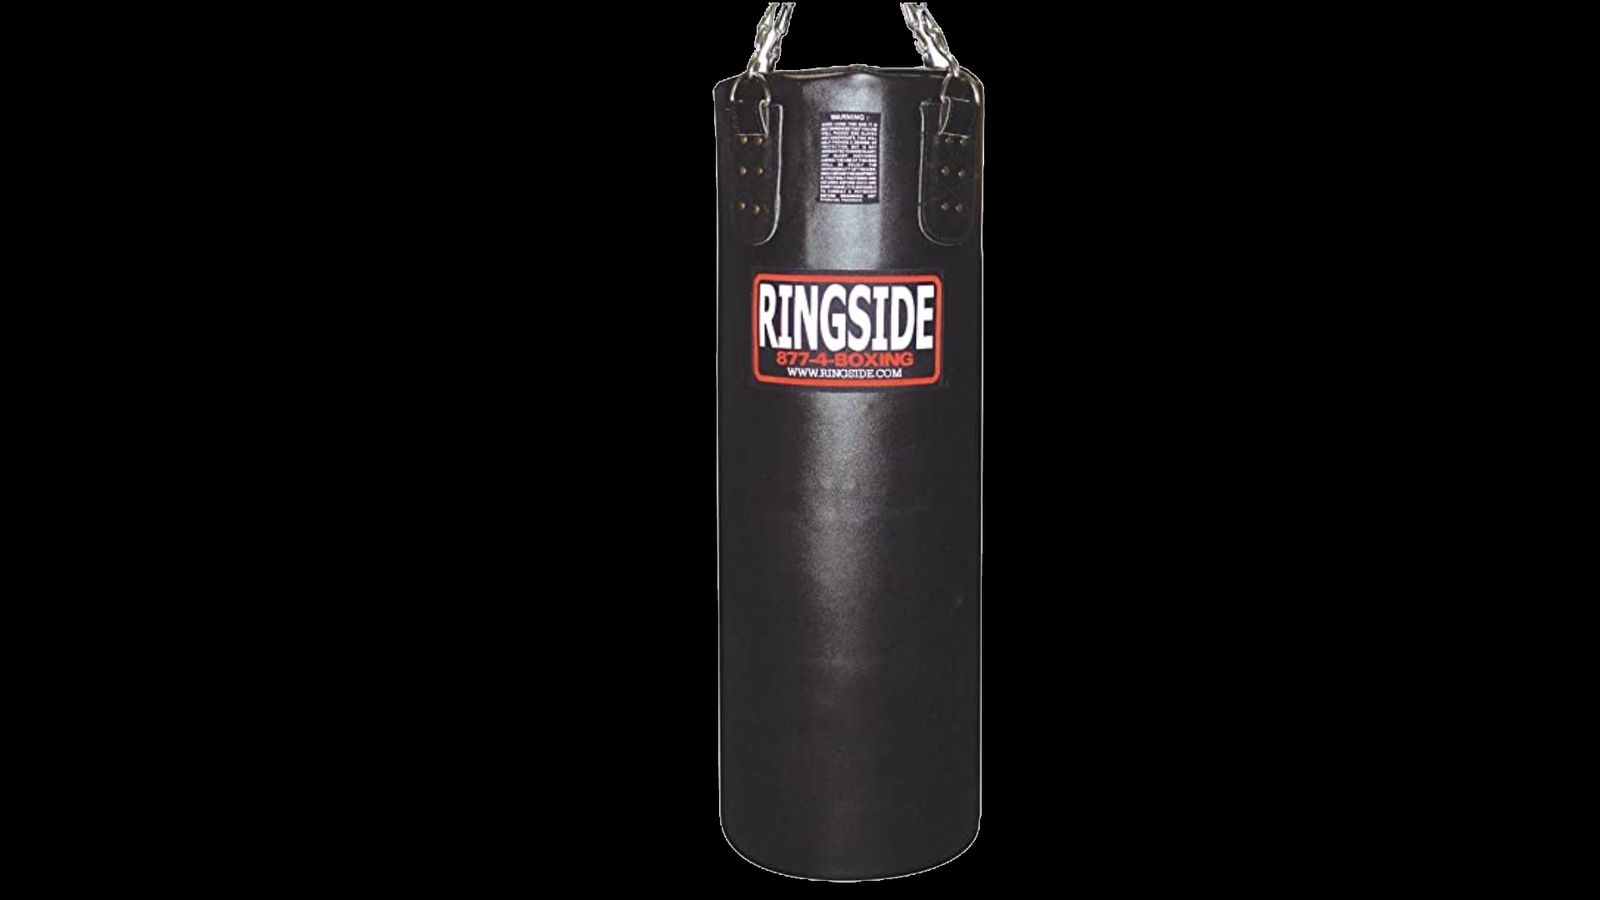 Ringside Boxing Bag product image of a hanging black bag with a red and white logo.